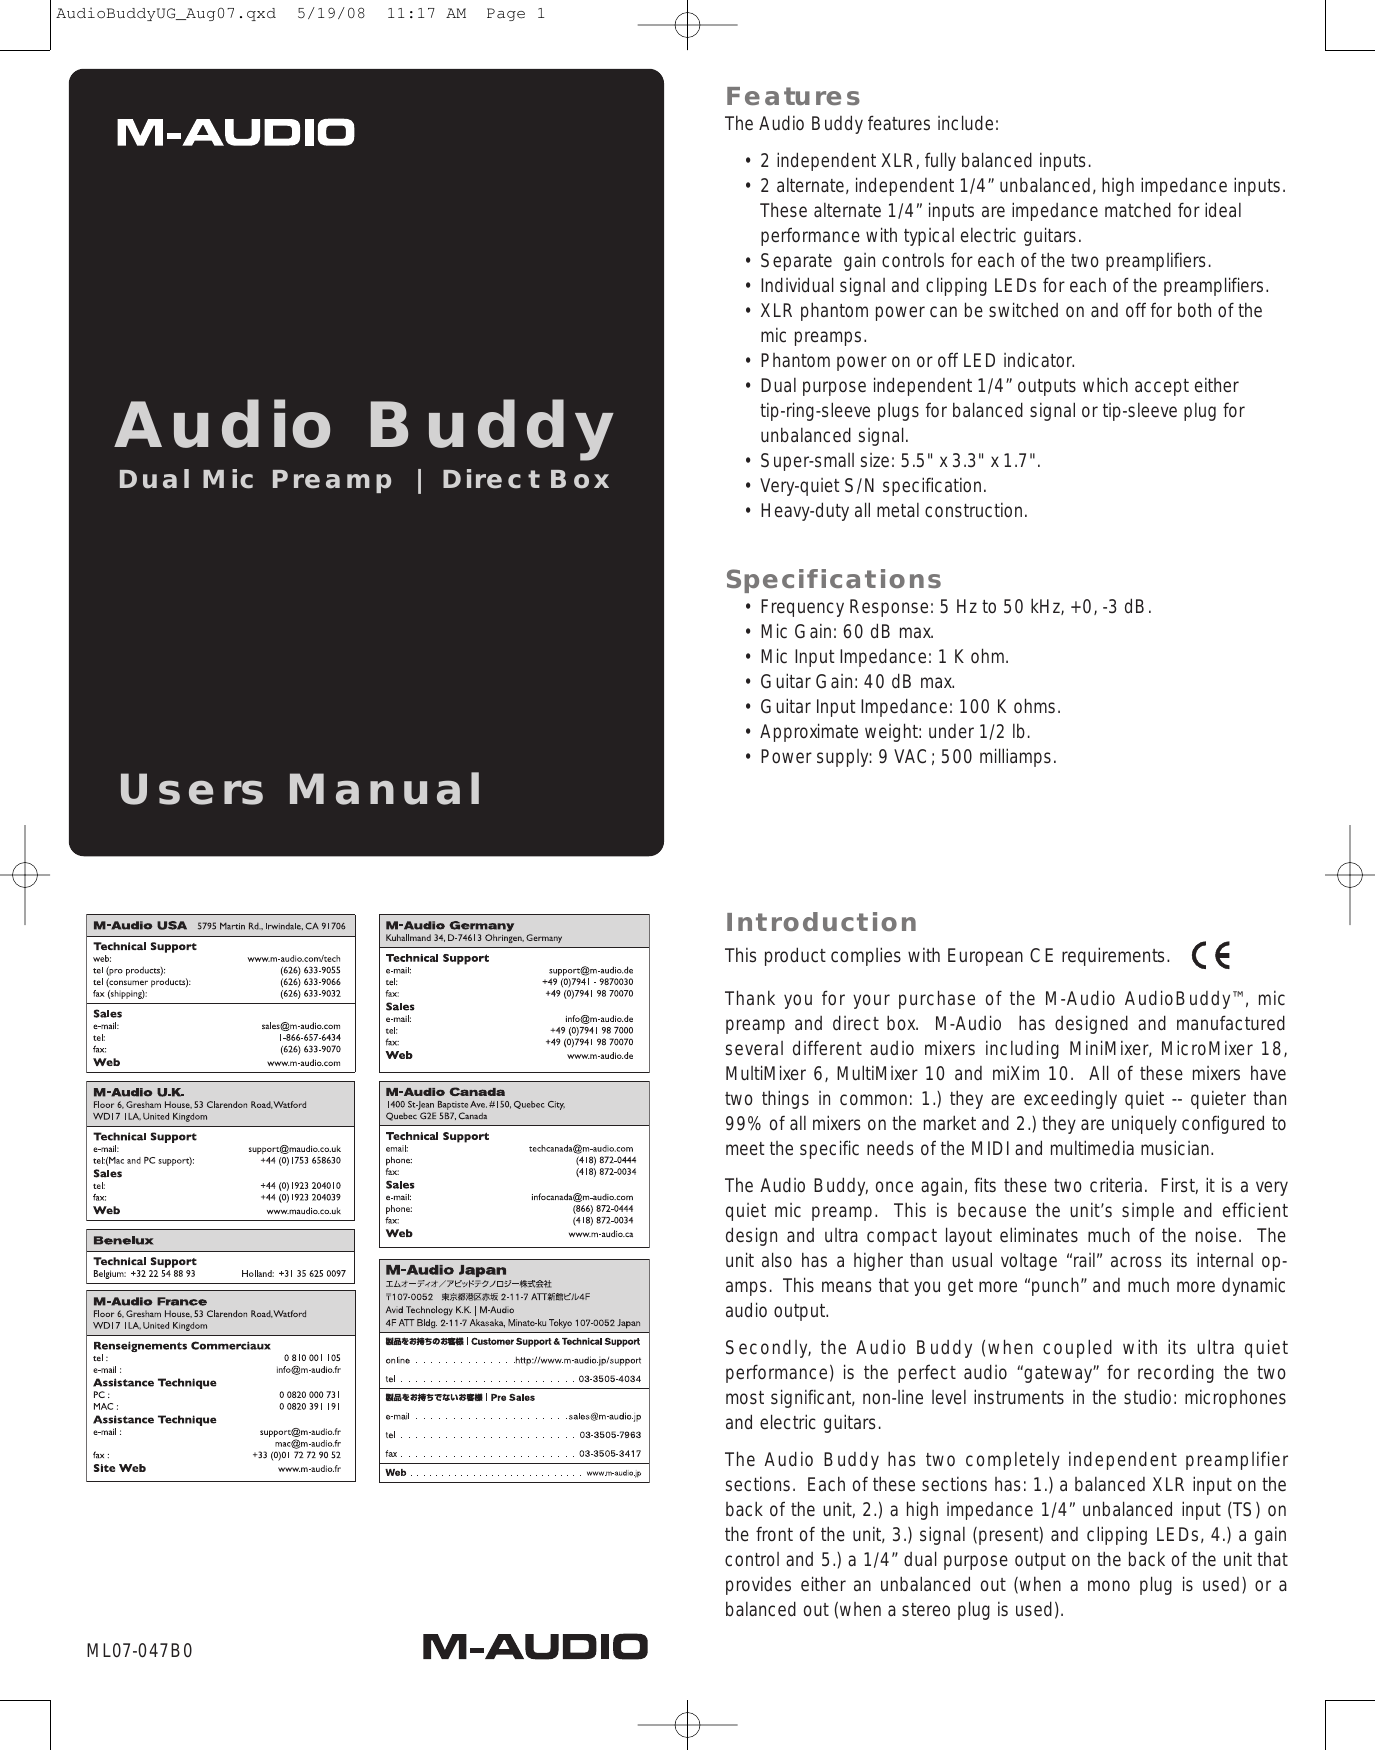 Page 1 of 8 - M-Audio M-Audio-Audio-Buddy-Dual-Mic-Preamp-Users-Manual- Audio Buddy User Guide  M-audio-audio-buddy-dual-mic-preamp-users-manual